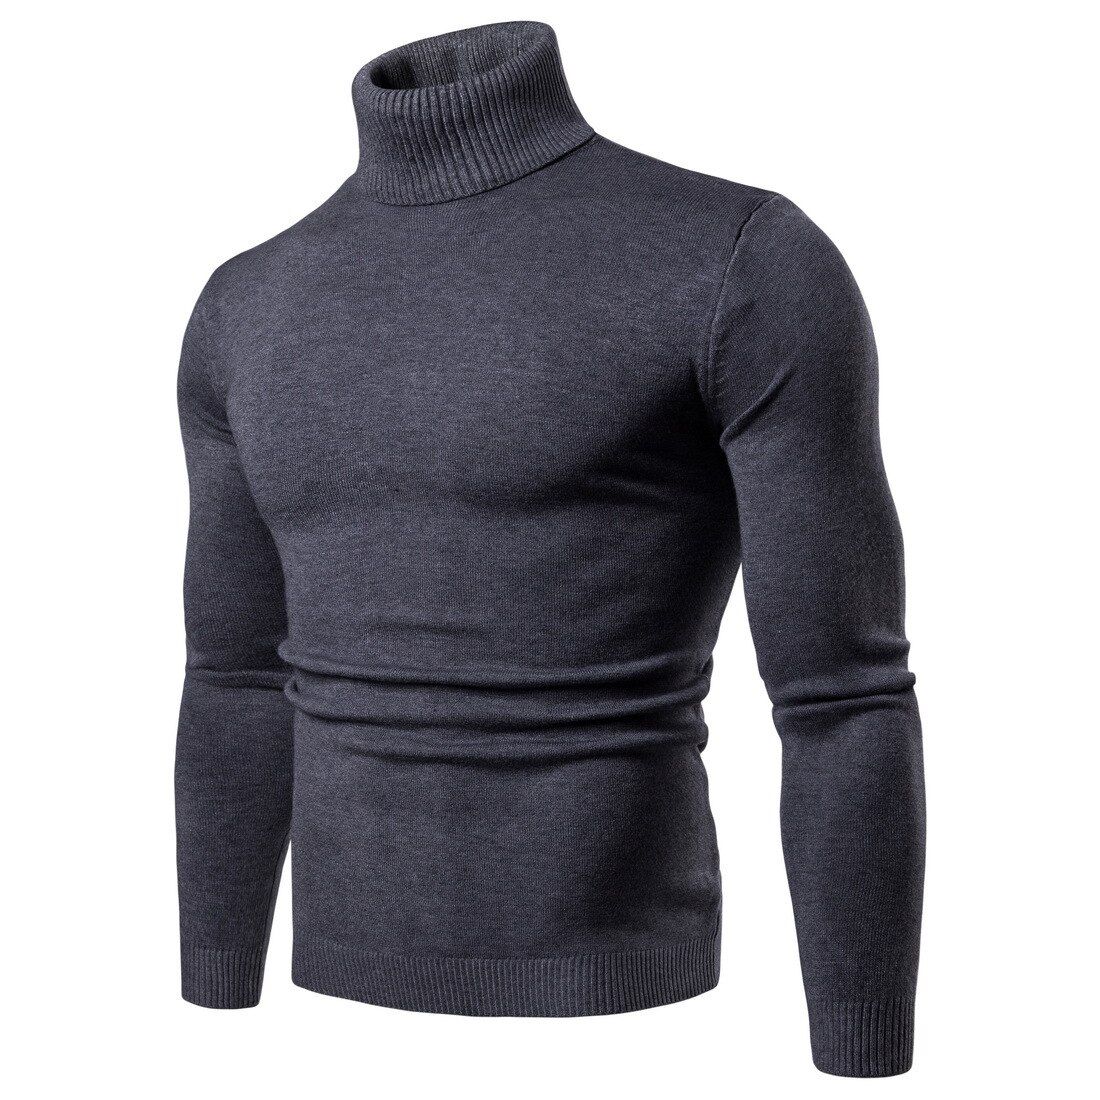 2022 Men Solid Color Sweaters Warm Casual Knitted Pullovers Sweater Clothes